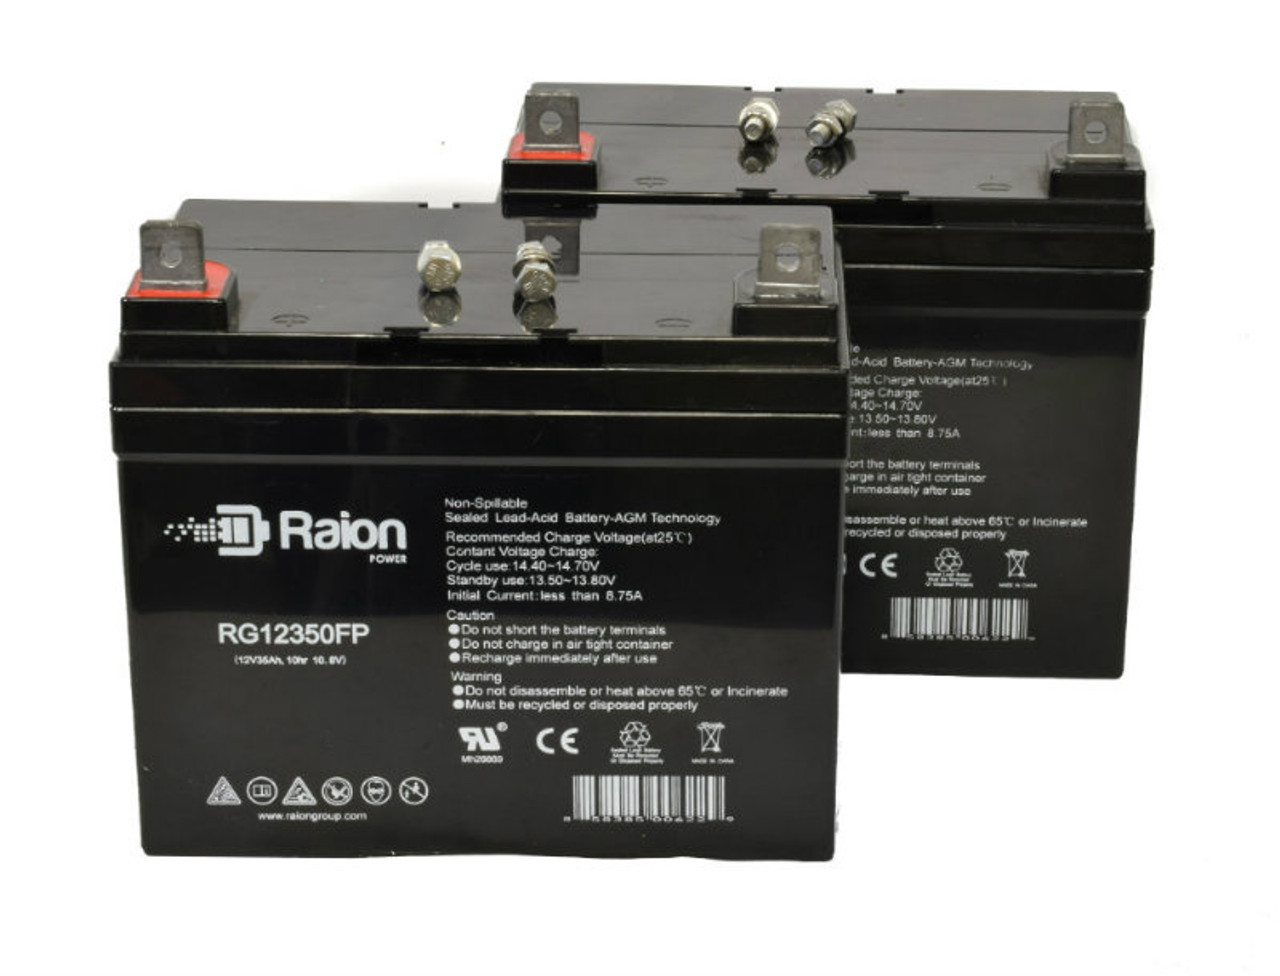 Raion Power Replacement 12V 35Ah Lawn Mower Battery for Woods R1540 - 2 Pack